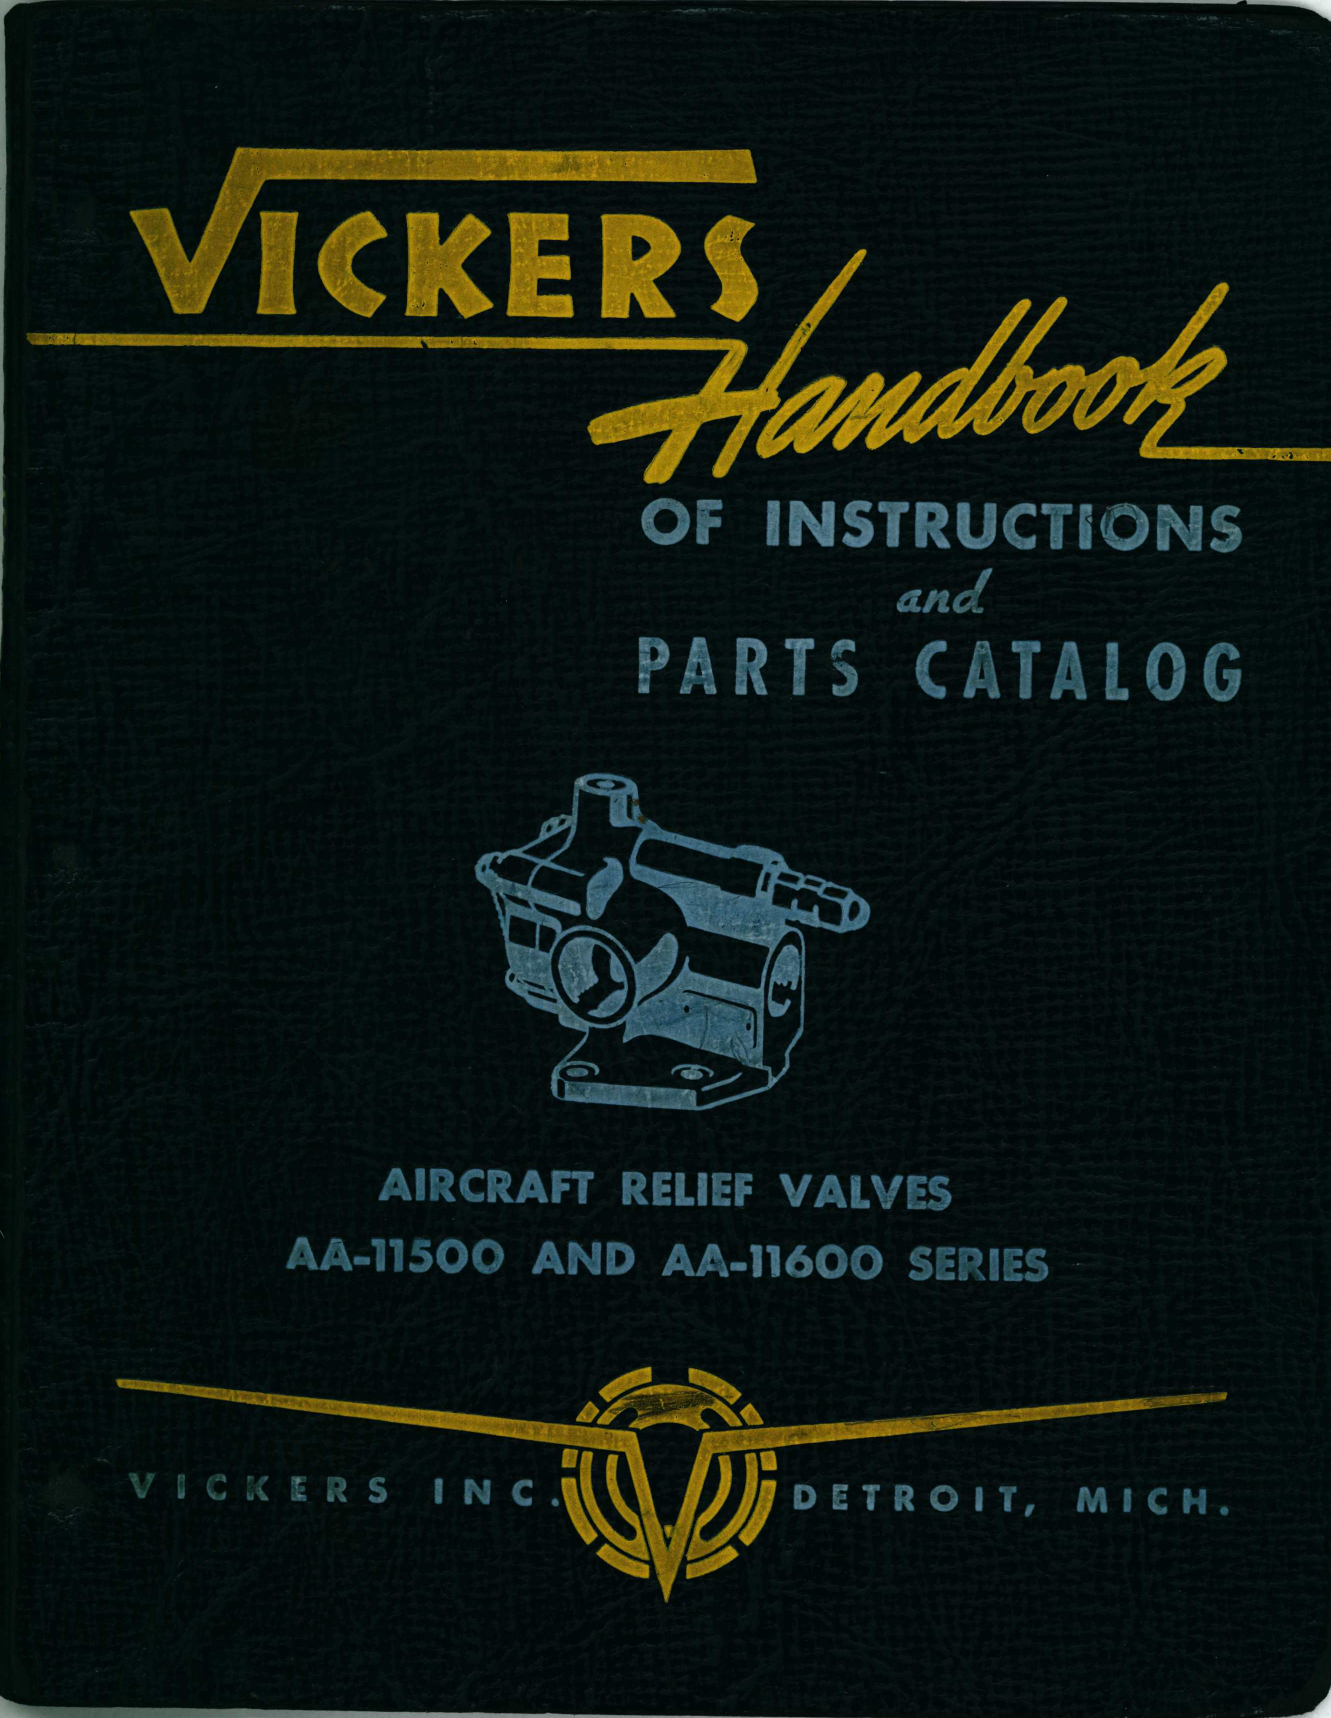 Sample page 1 from AirCorps Library document: Handbook Of Instructions with Parts Catalog for Aircraft Relief Valves AA-11500 and AA-11600 Series